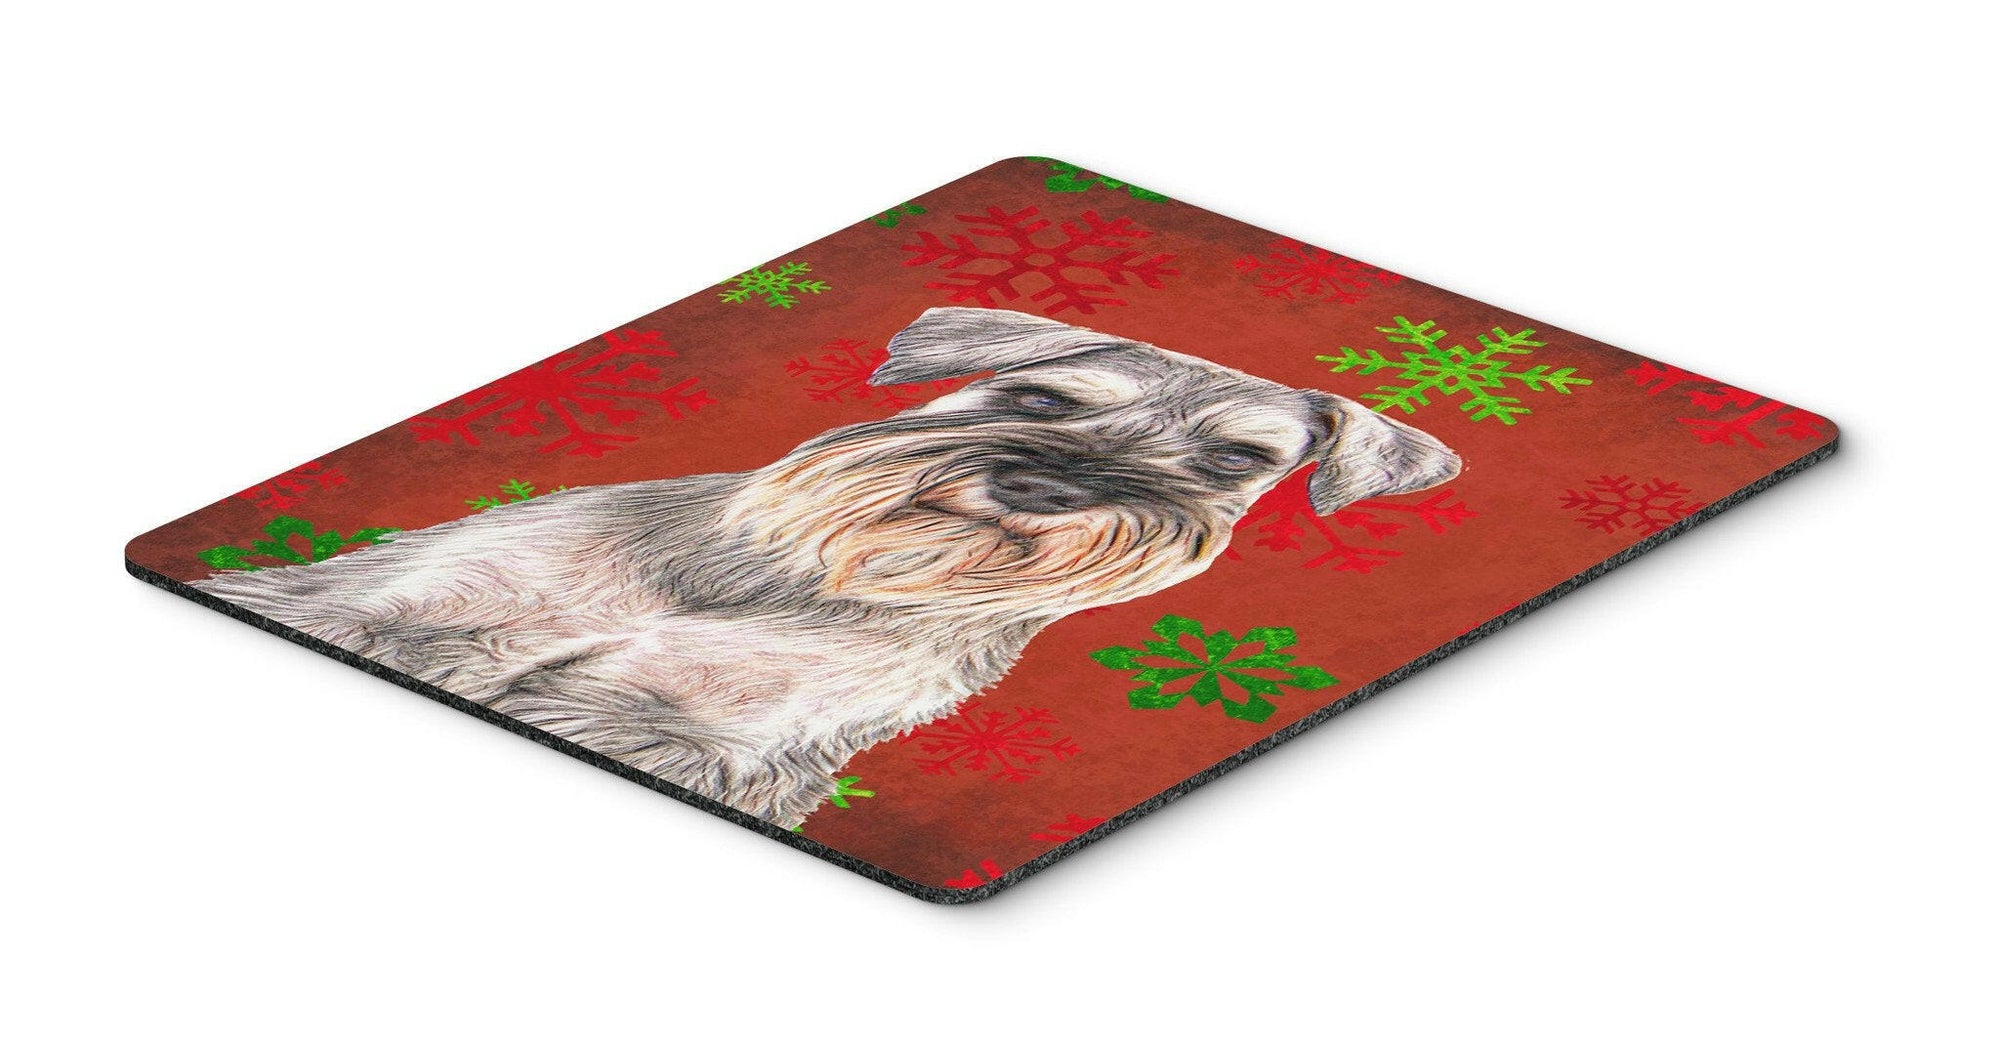 Red Snowflakes Holiday Christmas  Schnauzer Mouse Pad, Hot Pad or Trivet KJ1186MP by Caroline's Treasures